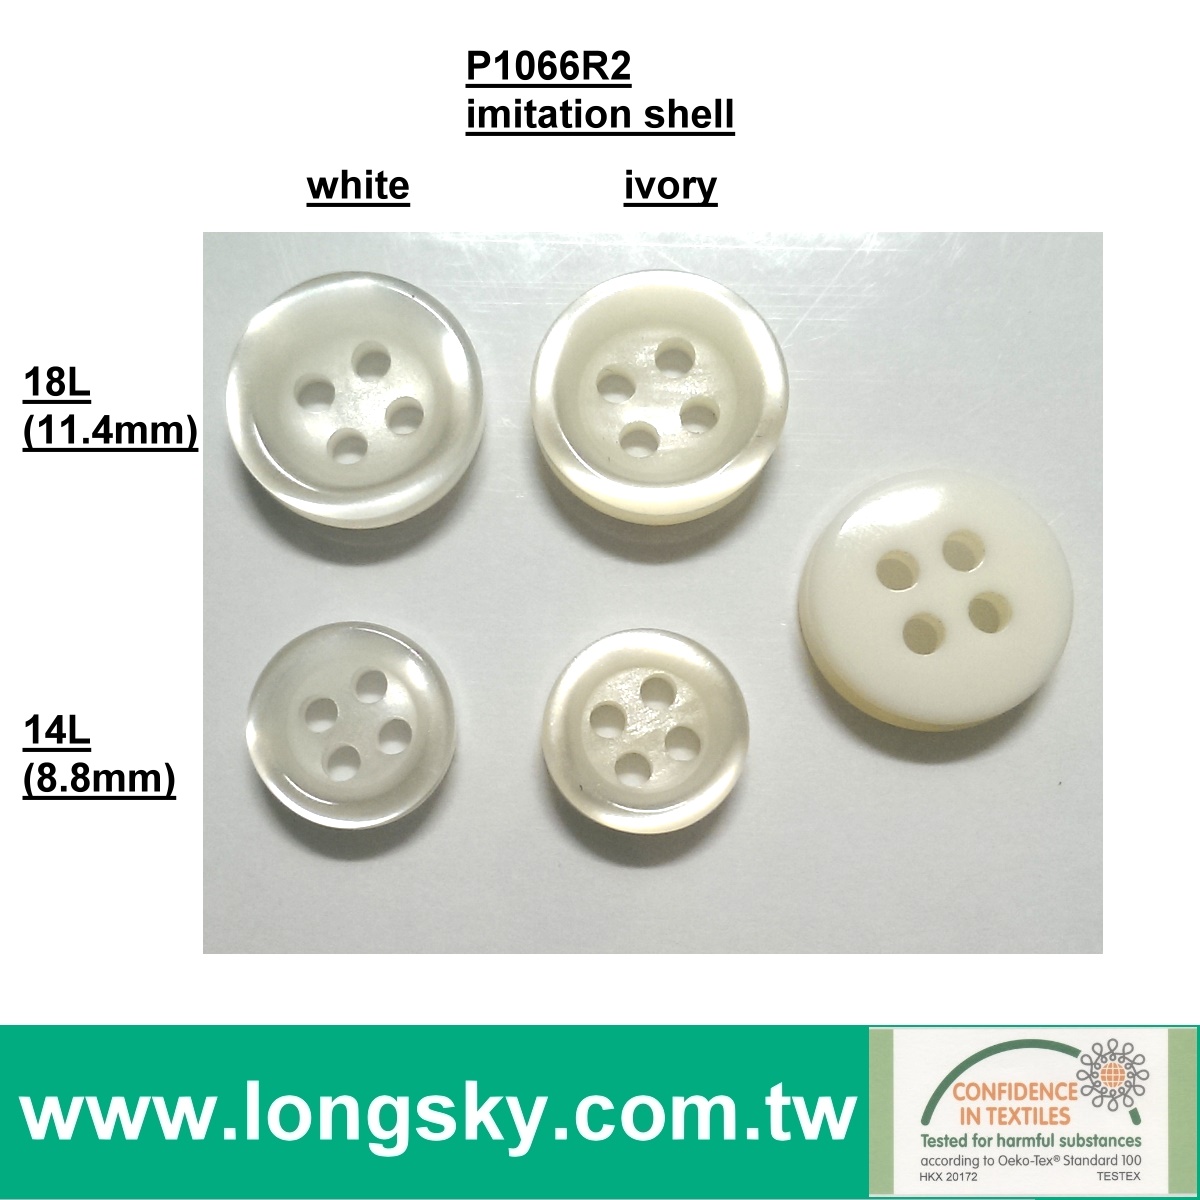 (P1066R2) 18L, 14L cream and black Imitation Shell Polyester Resin Shirt Button